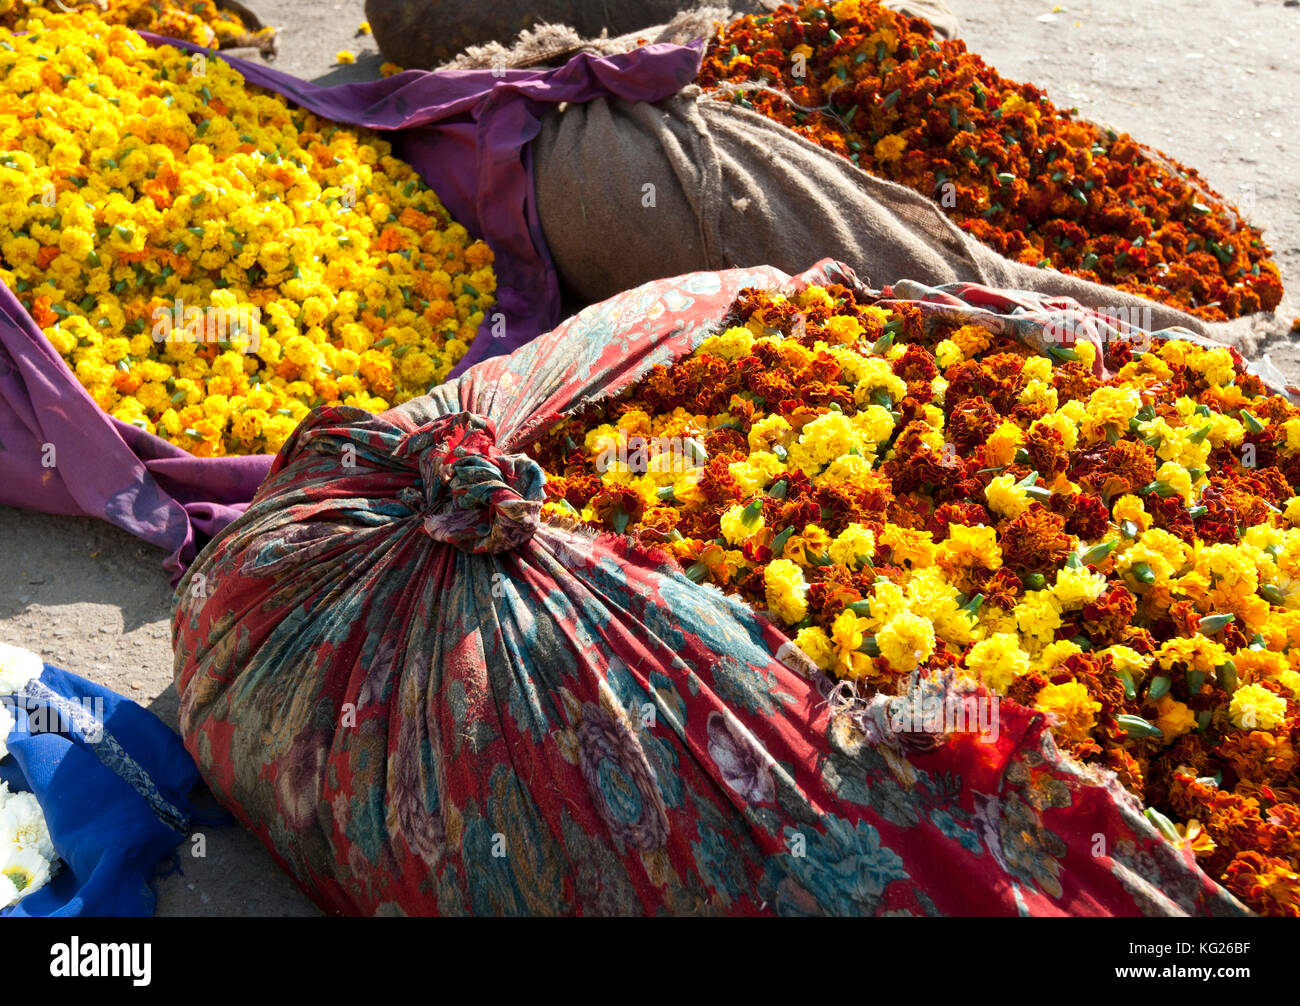 Cut yellow marigolds, weighed and bagged in cloth bundles, for sale in the early morning flower market, Jaipur, Rajasthan, India, Asia Stock Photo